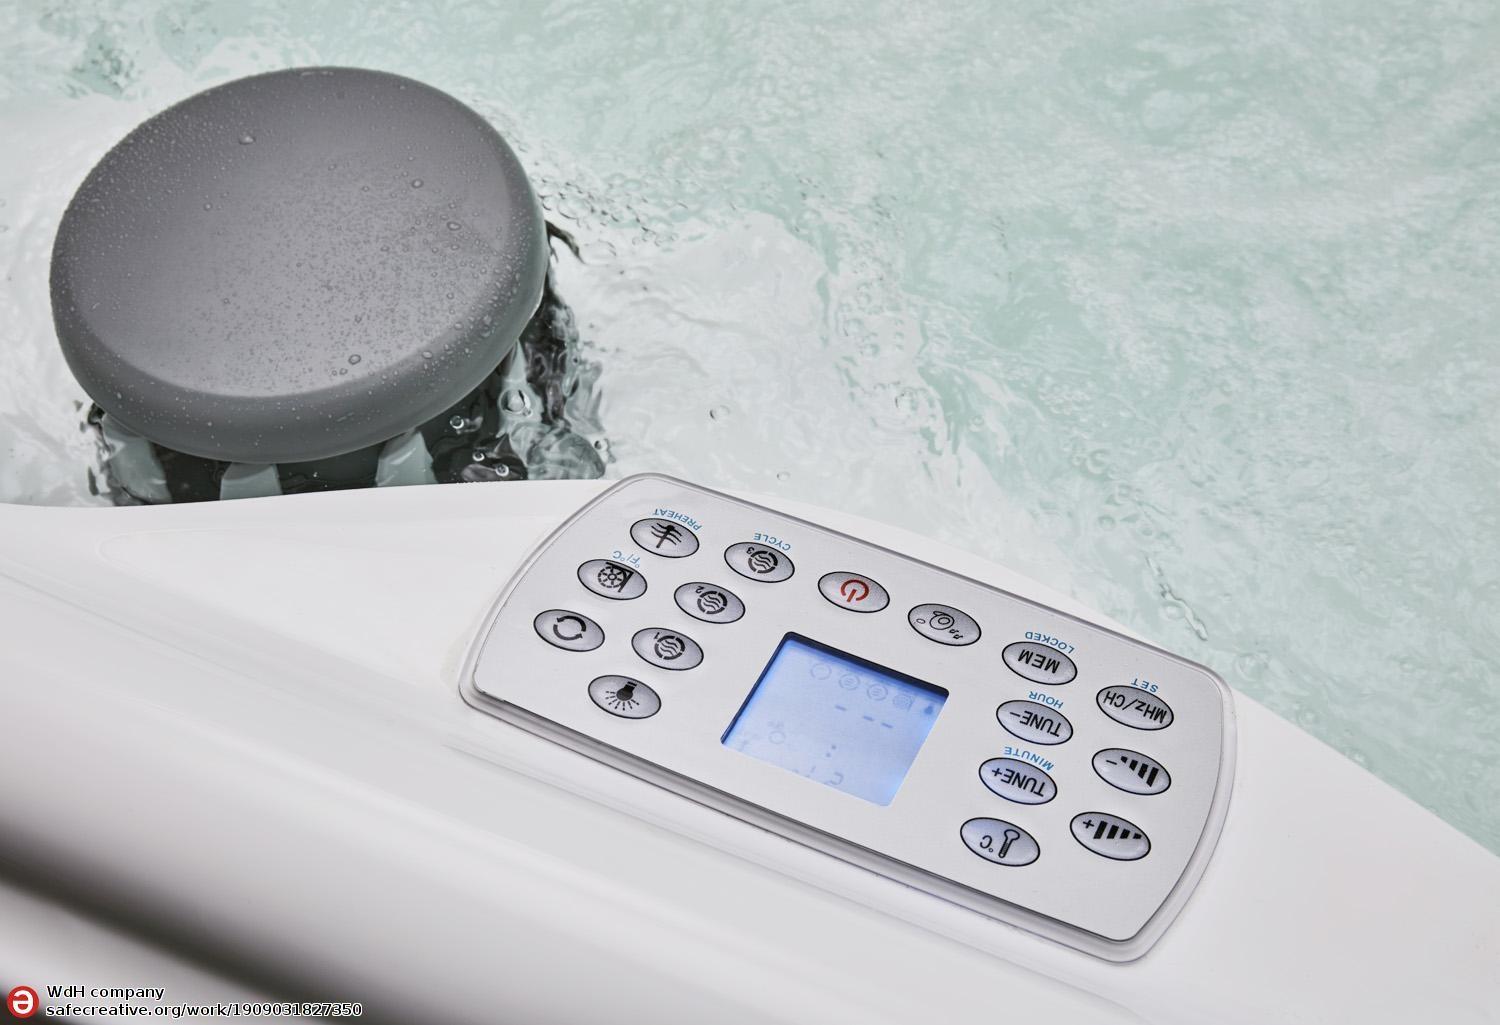 Spa jacuzzi exterior AS-001A